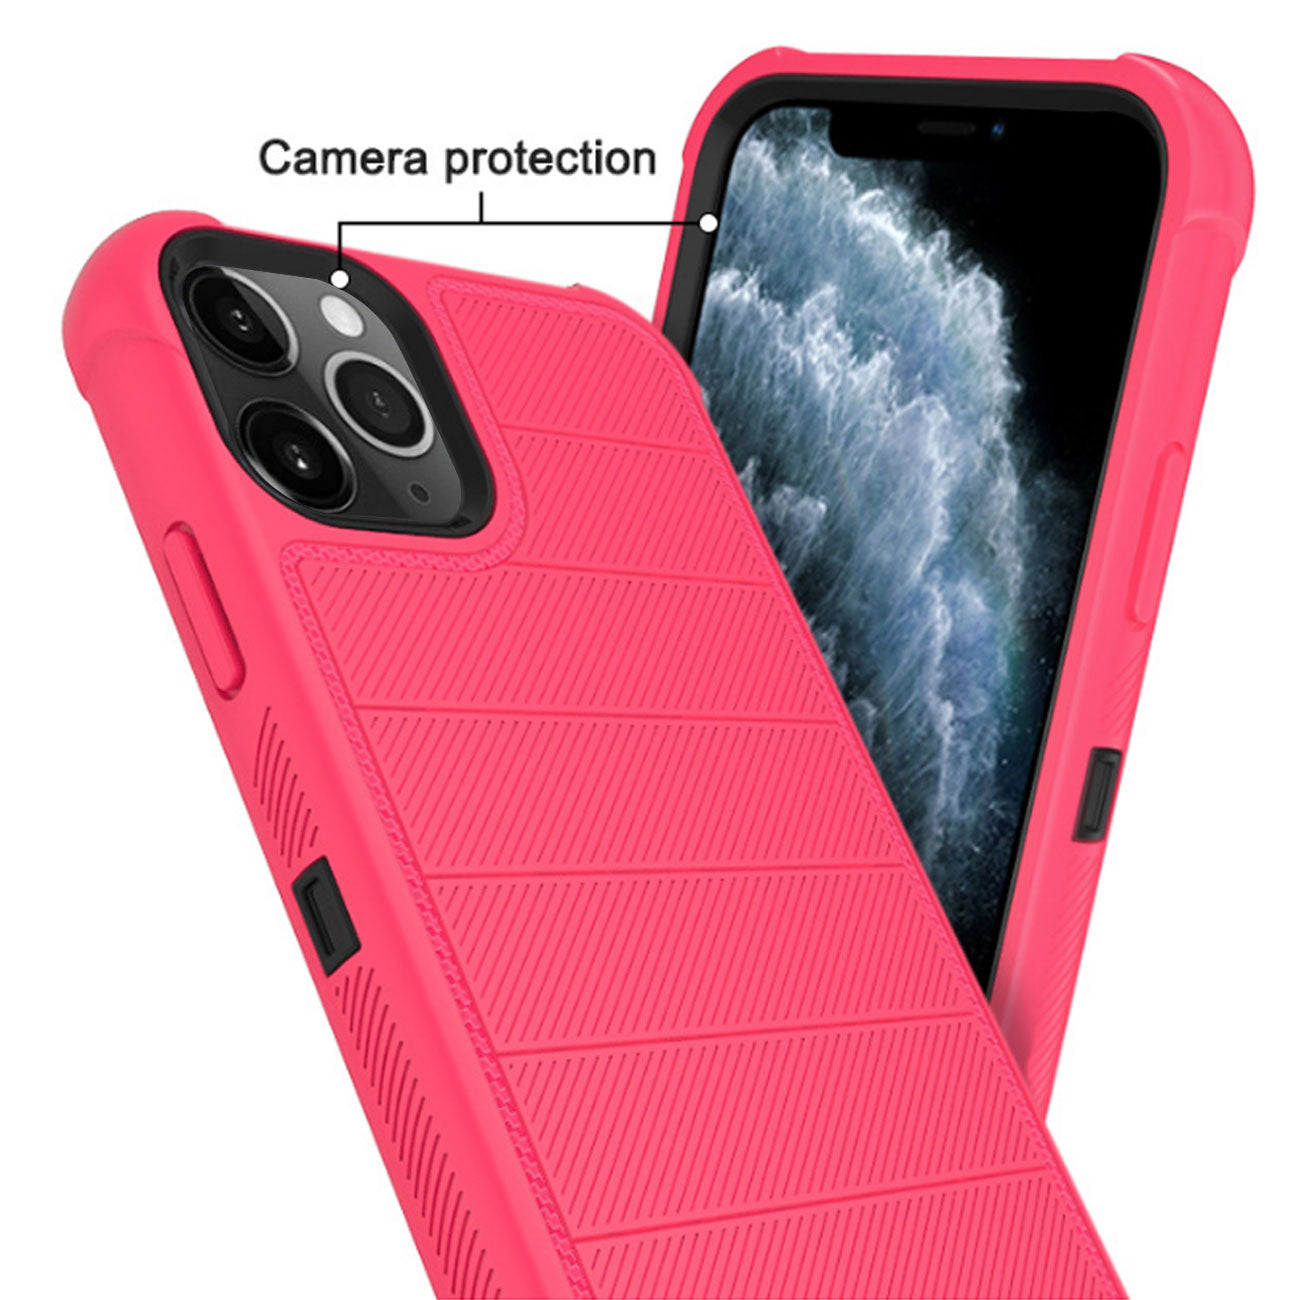 3-In-1 Hybrid Heavy Duty Holster Combo Case For APPLE IPHONE 11 PRO MAX In Hot Pink